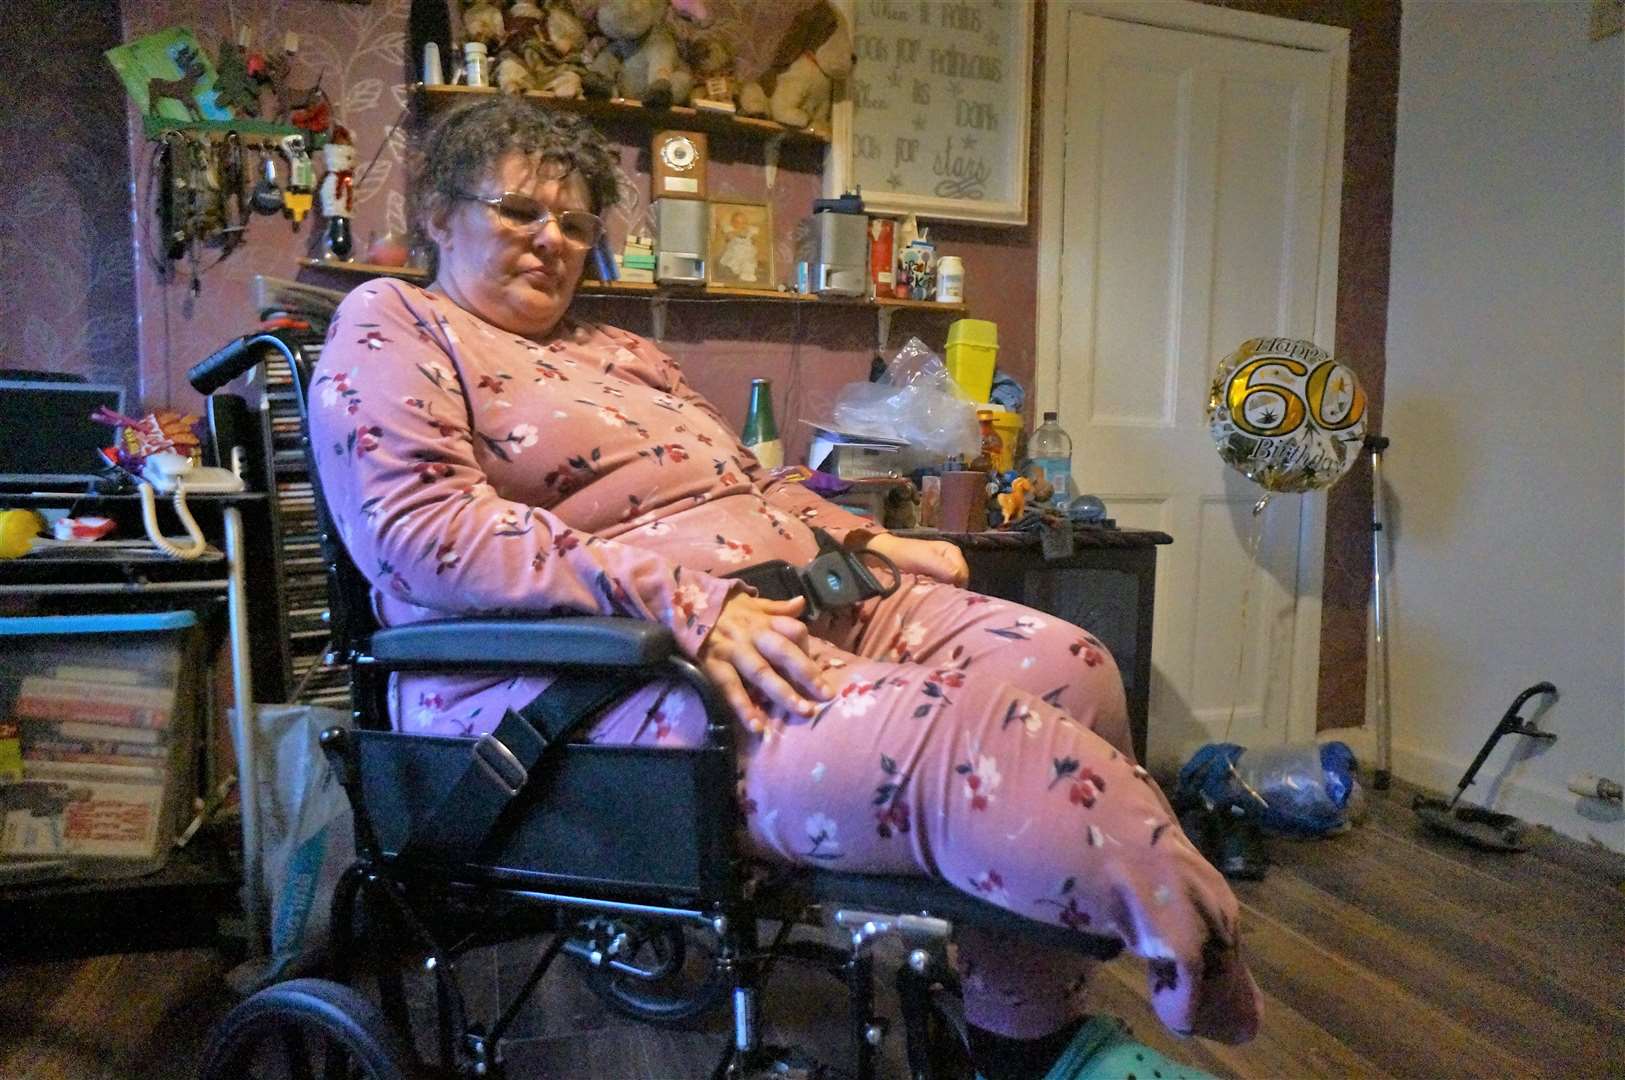 Janet says she has to sleep in her wheelchair through the whole night as the pain is worse when she lies down. Picture: DGS